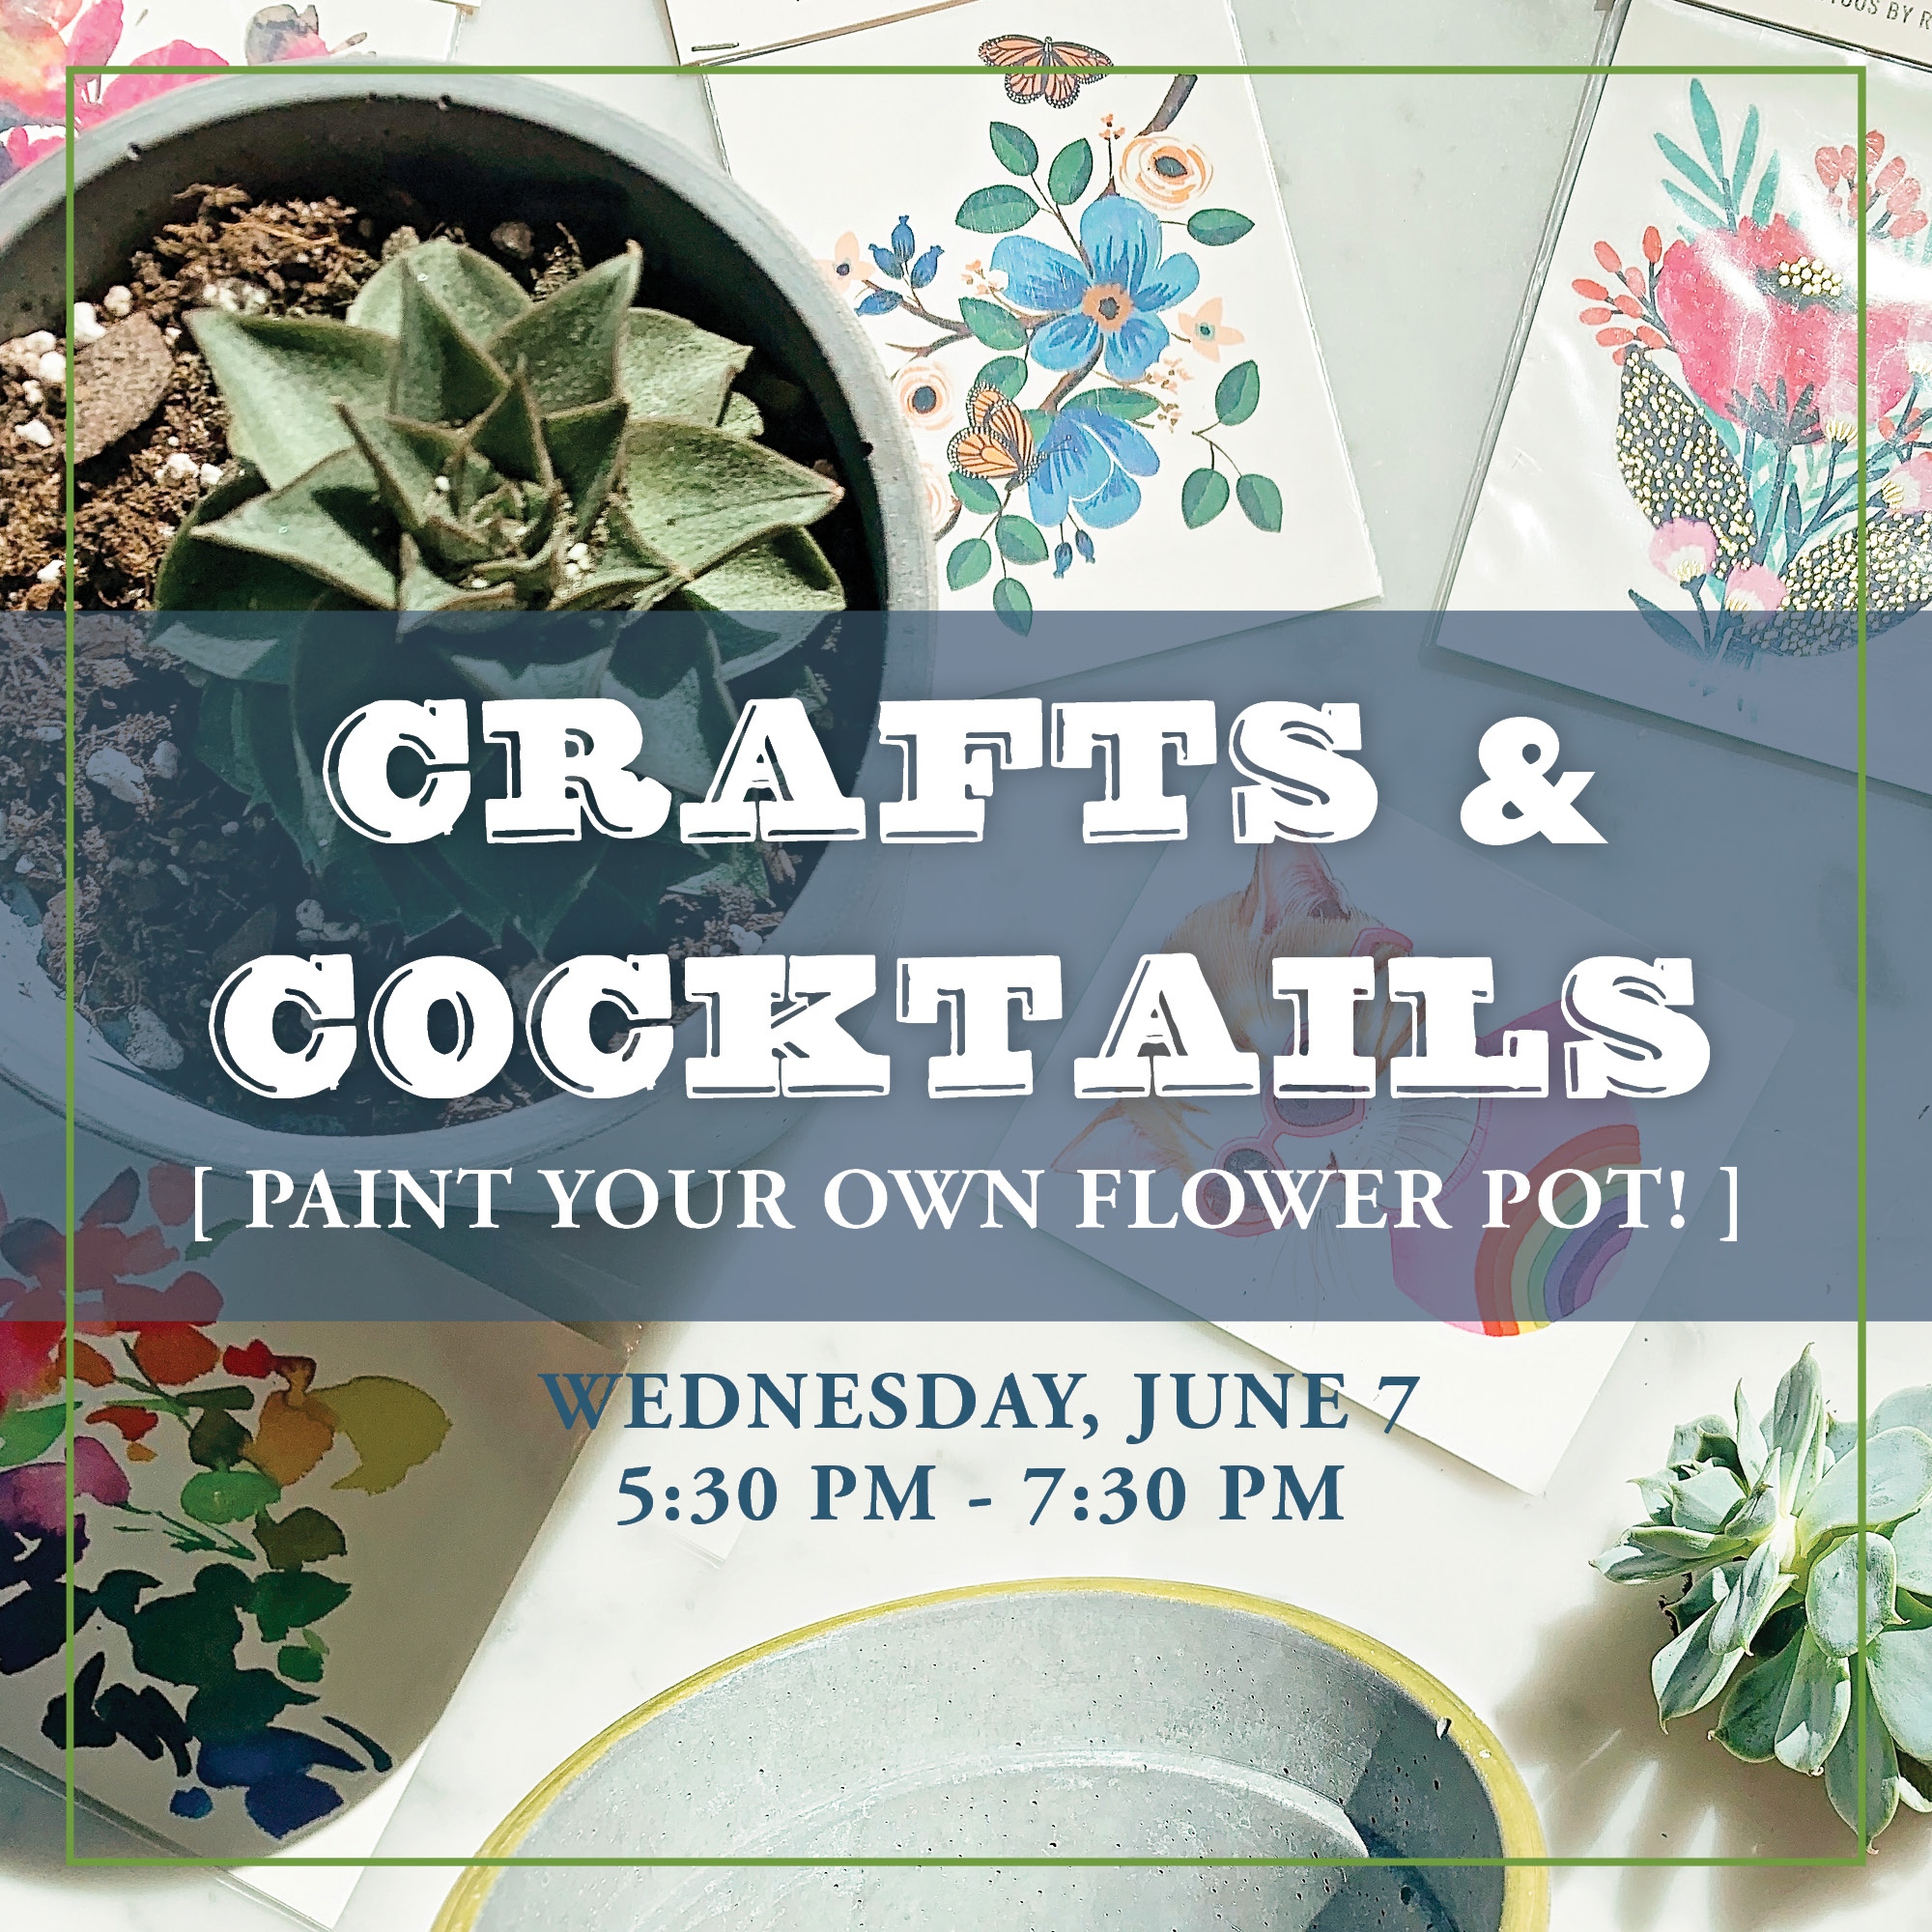 a poster for crafts and cocktails on a table.